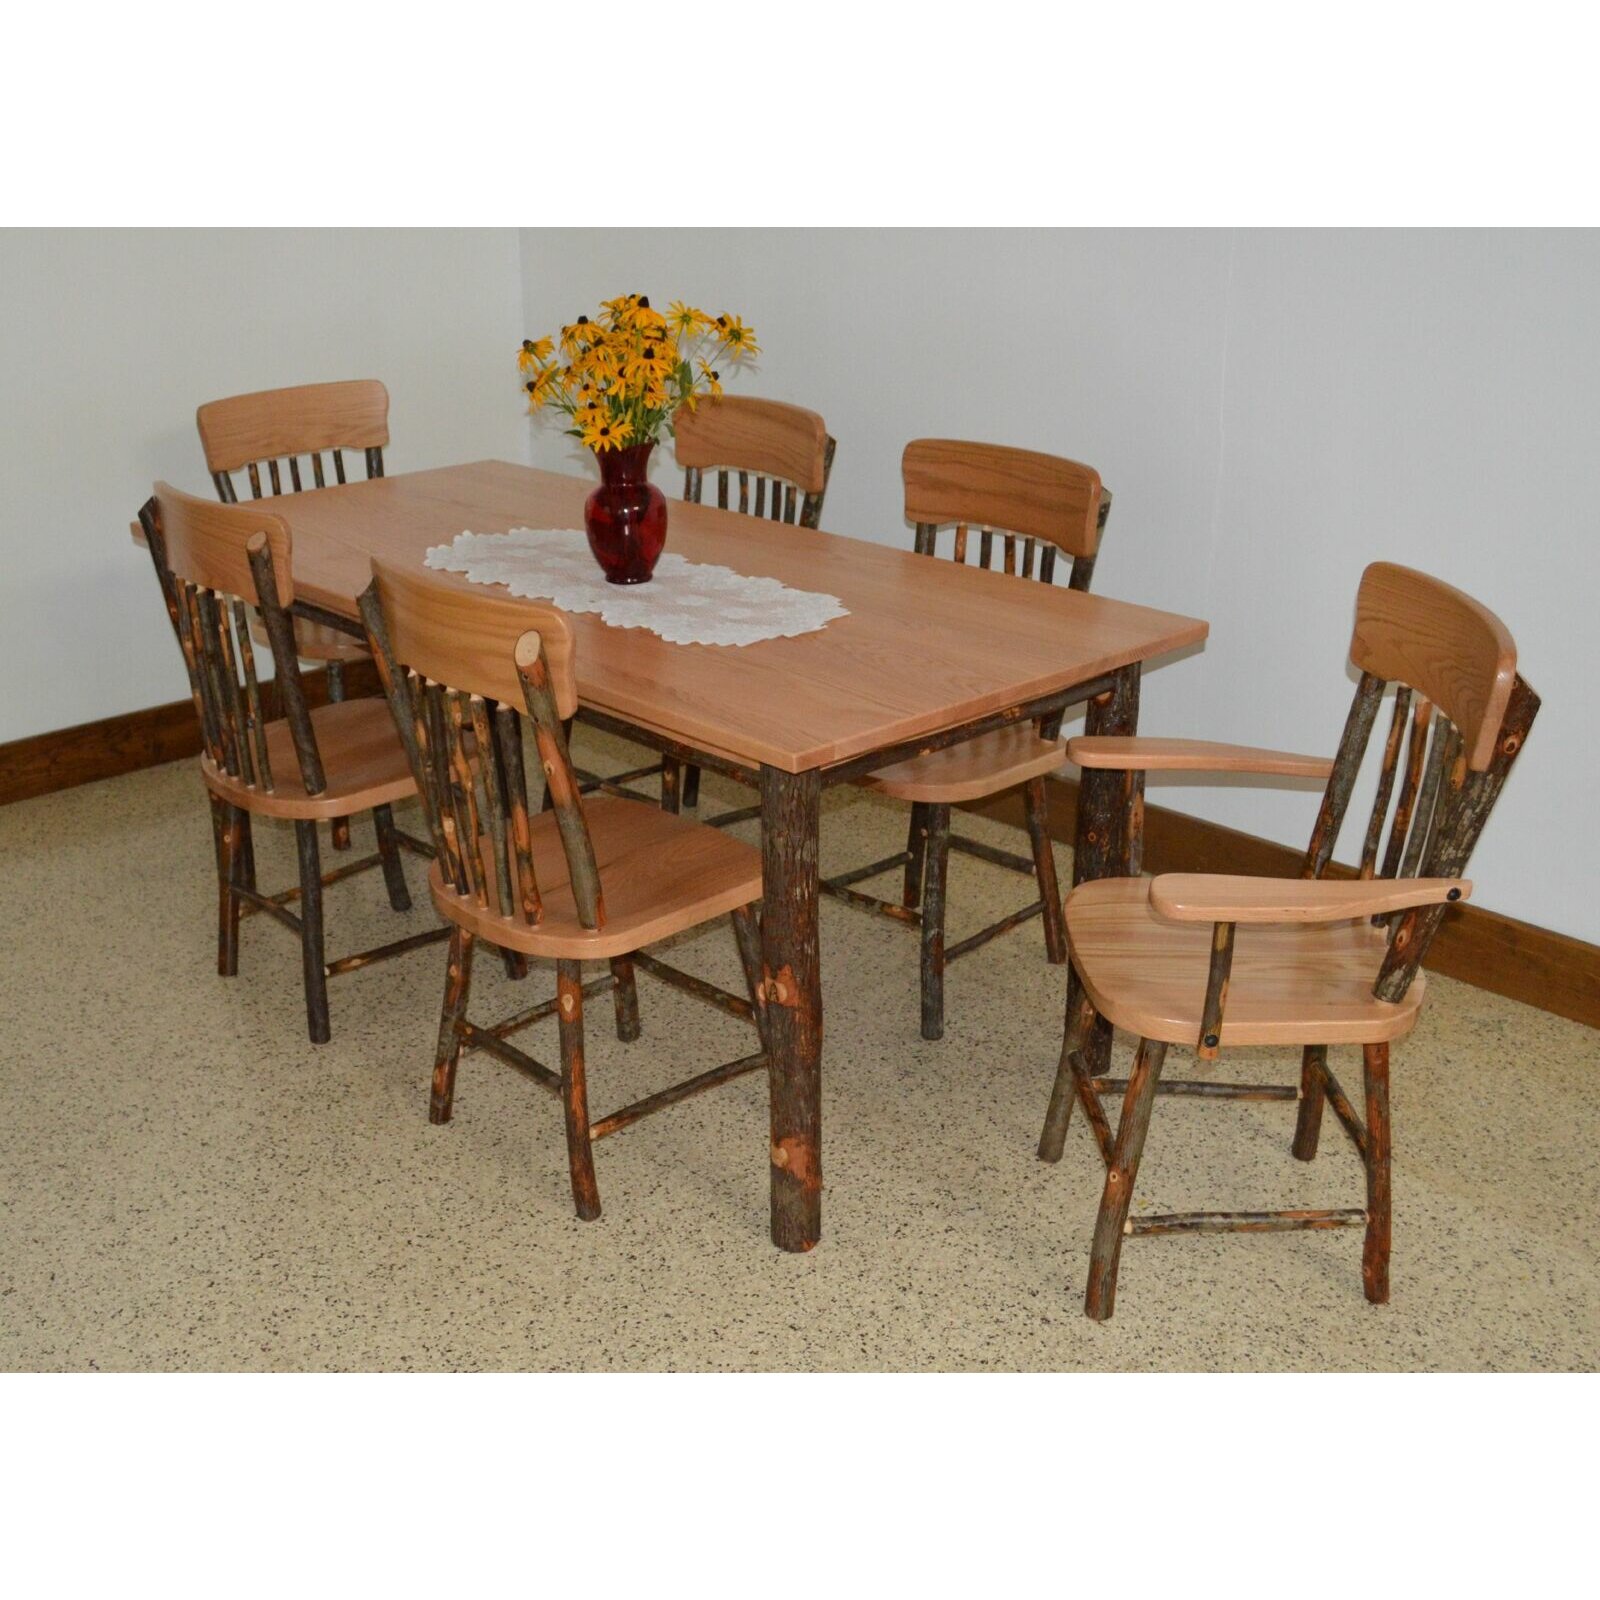  Hickory Dining Room Furniture for Small Space